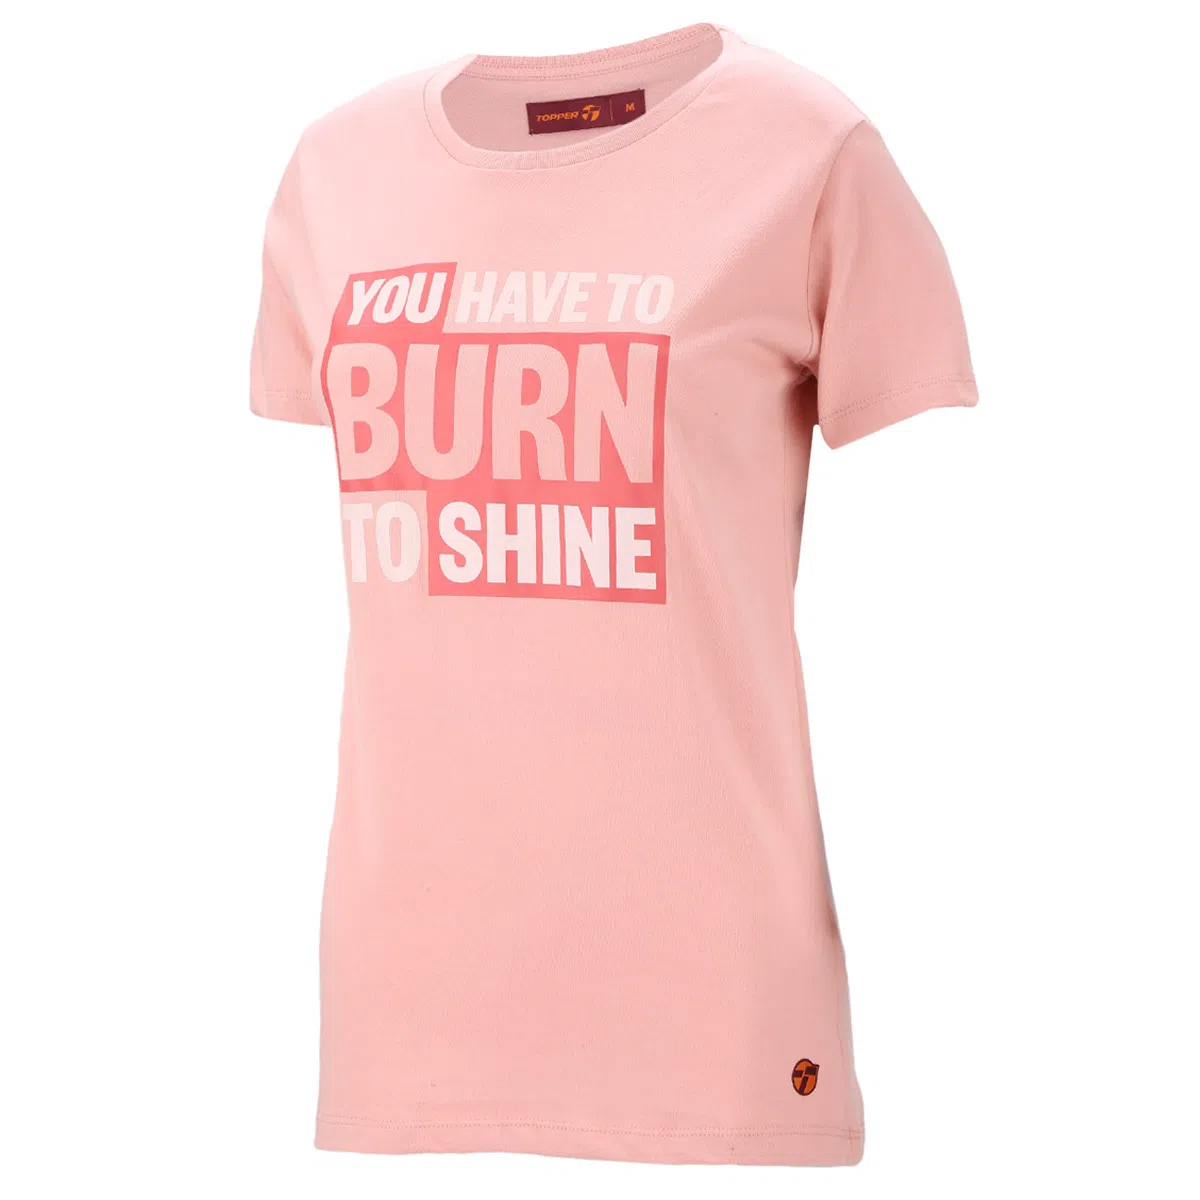 Remera Topper Gtw Mc Burn To Shine,  image number null